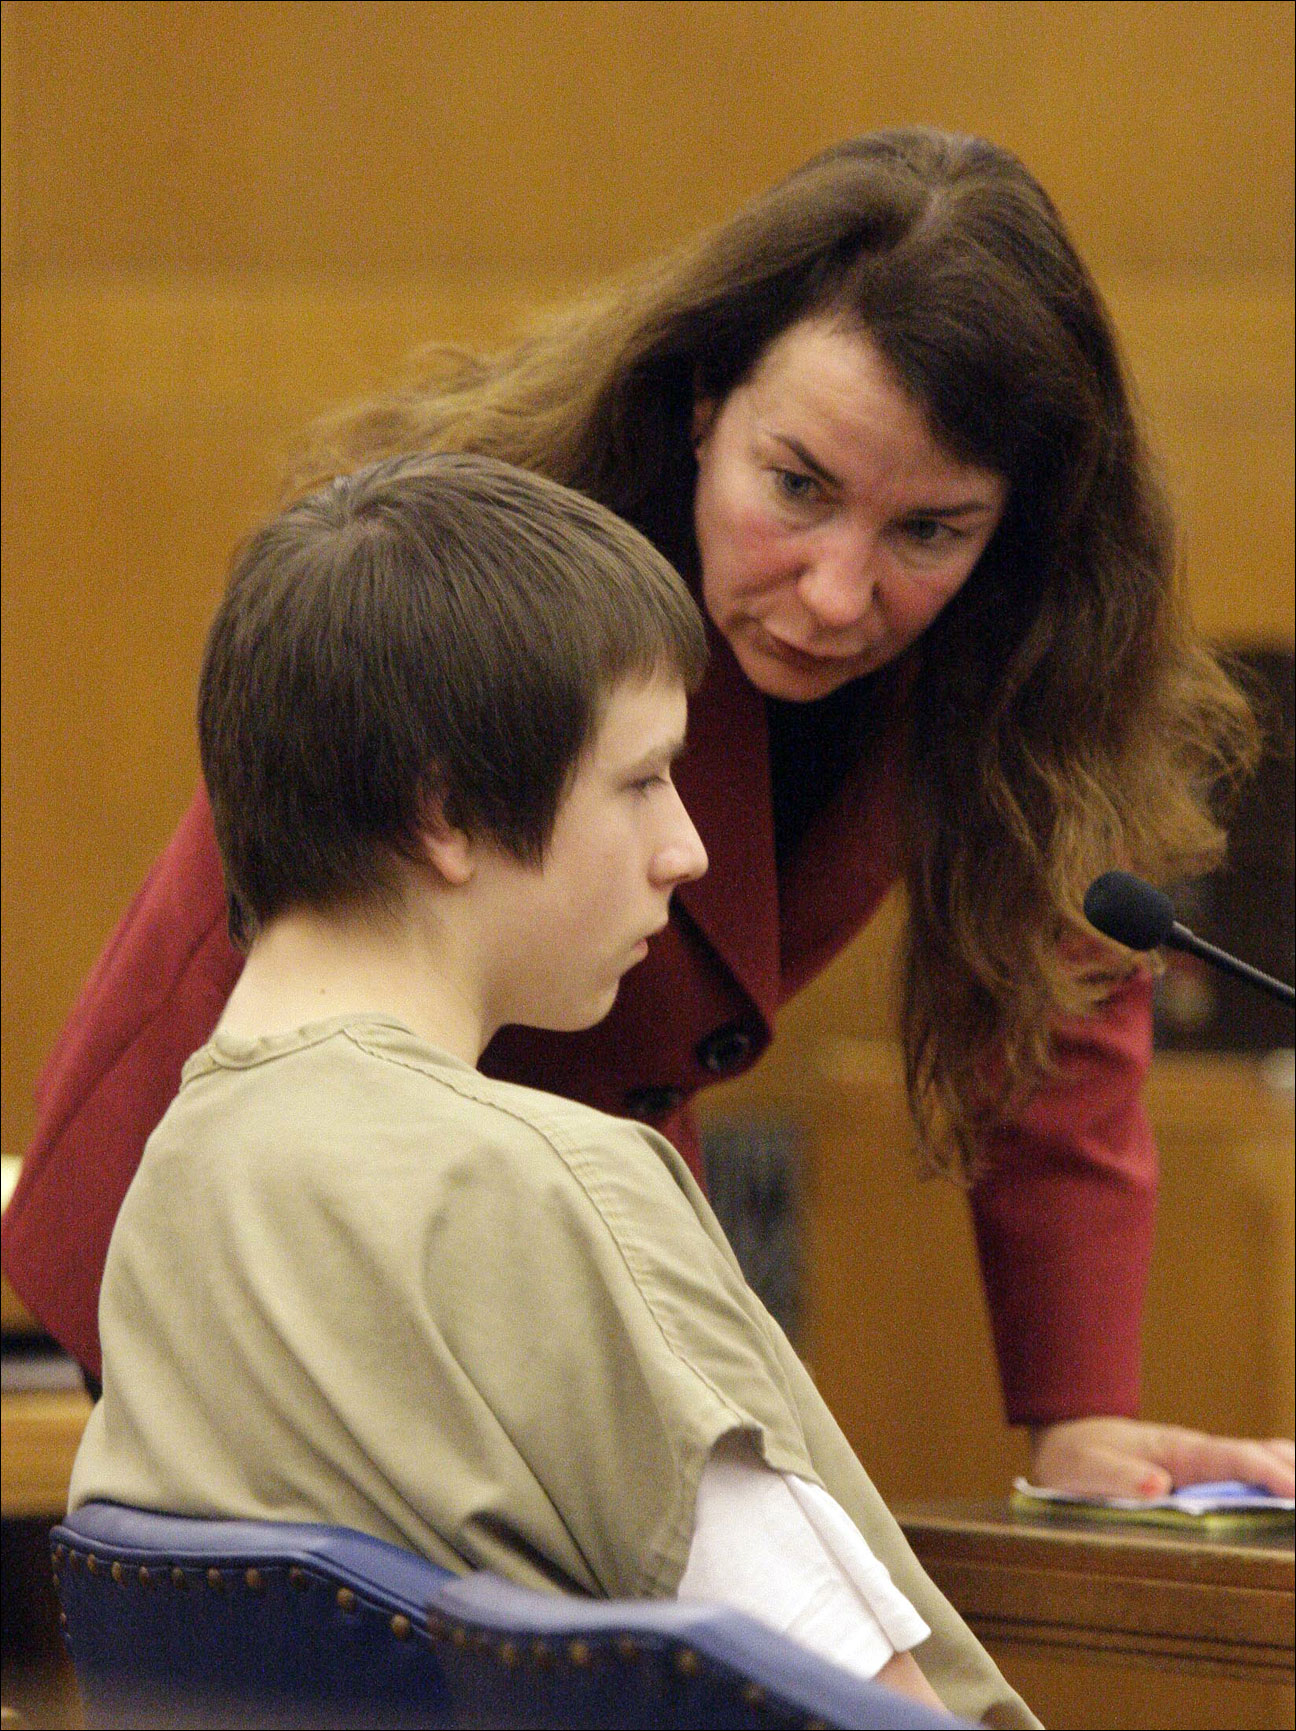 Defense attorney June Spoerl talks with Nathan Paape, 14, as he appears Wednesday June 12, 2013, at a motion hearing for his murder trial in Sheboygan, Wis. Jury selection for Paape is set to begin Friday, June 14, 2013 in Sheboygan, Wisc. Paape and Antonio Barbeau were both charged as adults in the September slaying of Barbeau's great-grandmother. Barbeau pleaded no contest earlier this month to a charge of first-degree homicide. (AP Photo/The Sheboygan Press, Bruce Halmo)